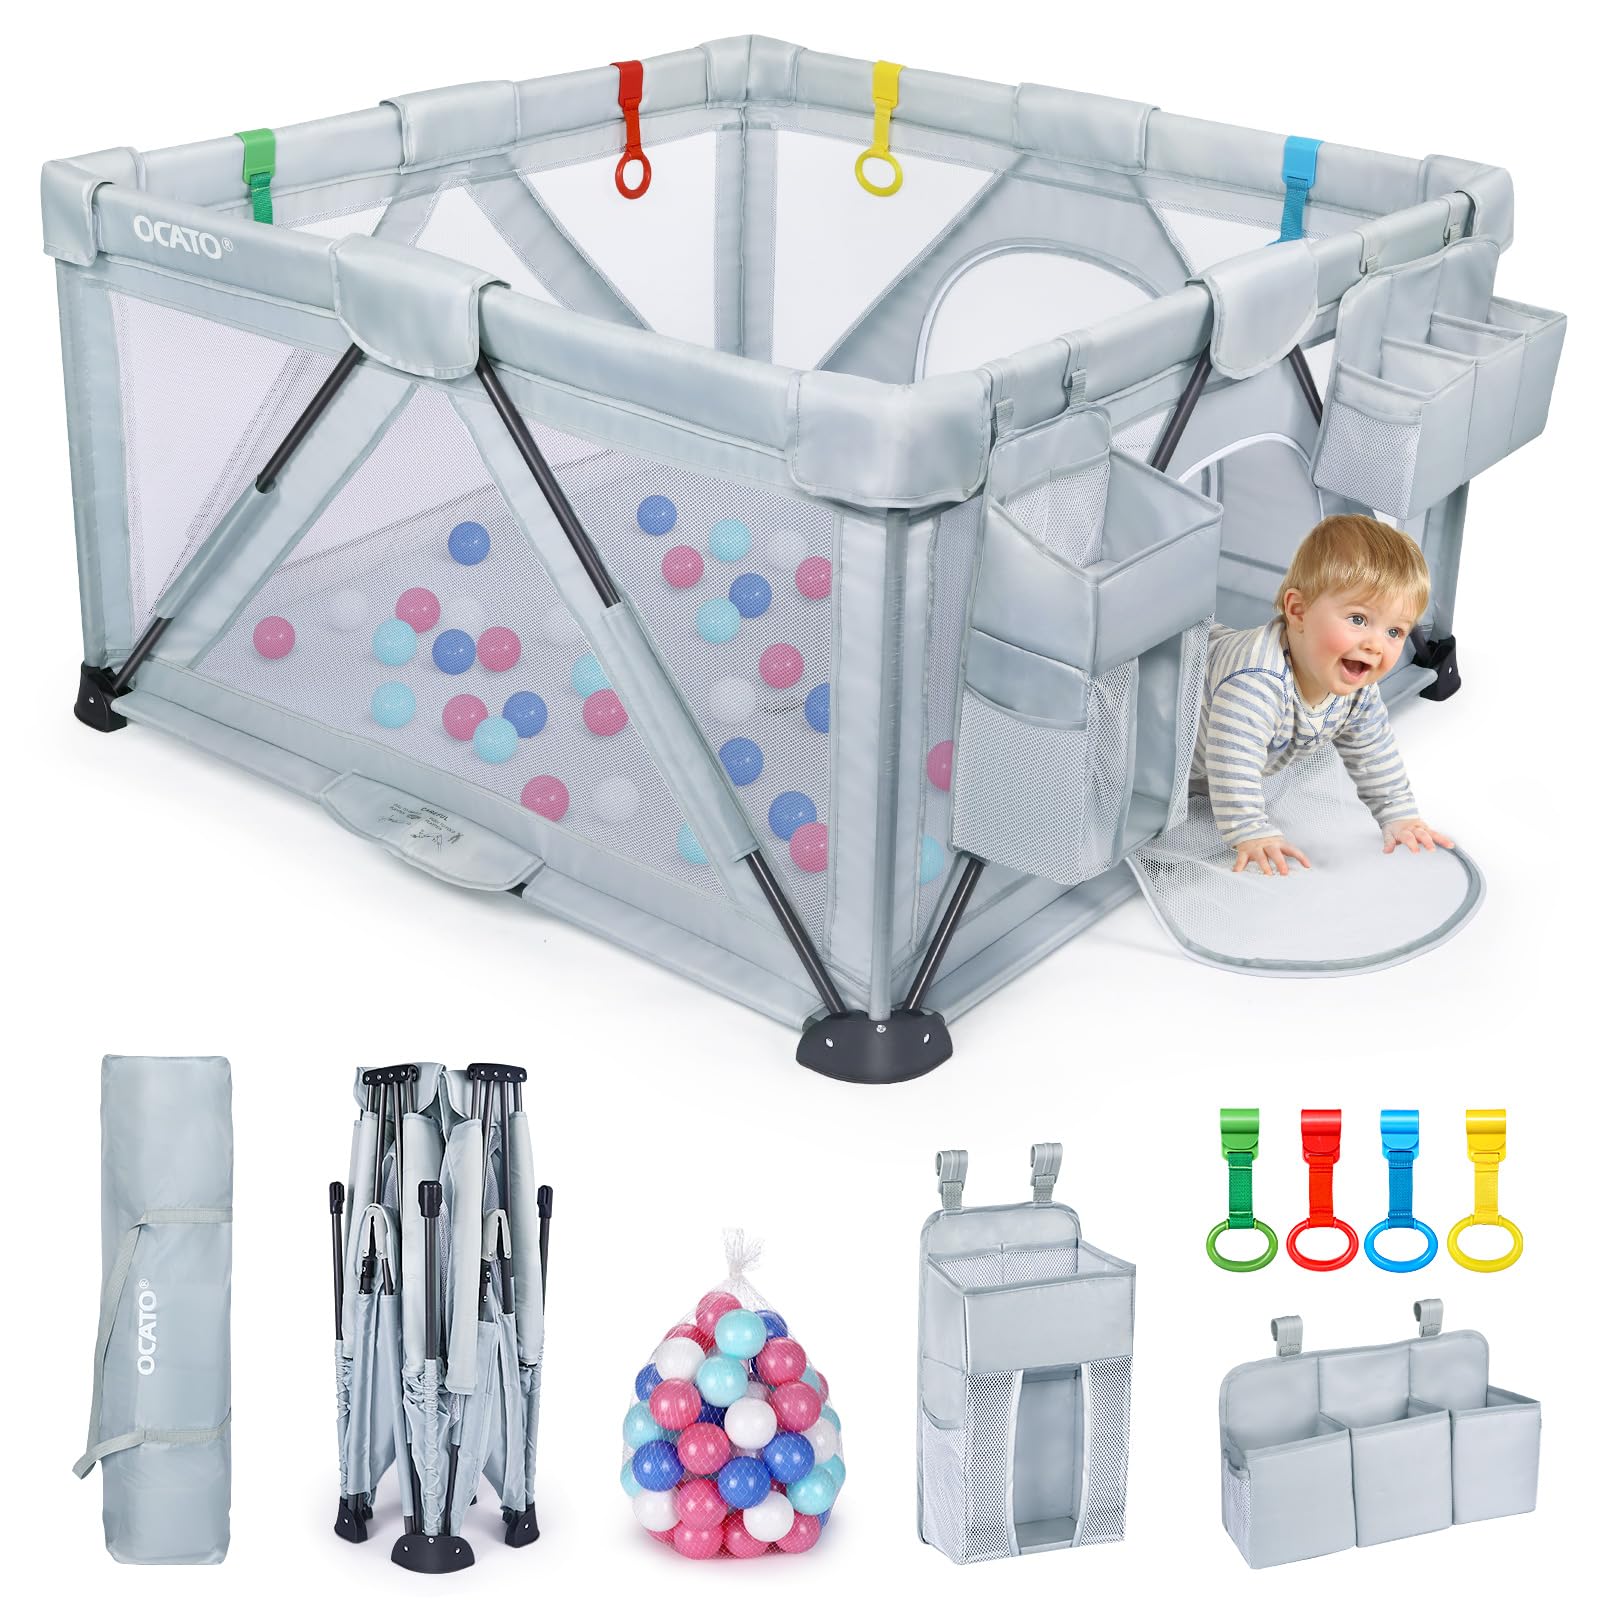 OCATO Baby Playpen: Foldable Playpen for Babies and Toddlers Large Play Pen Portable Playpen Fence Indoor Outdoor Kids Safety Area Travel Play Yard with 2 Storage Bags 4 Handlers 50 Balls (50